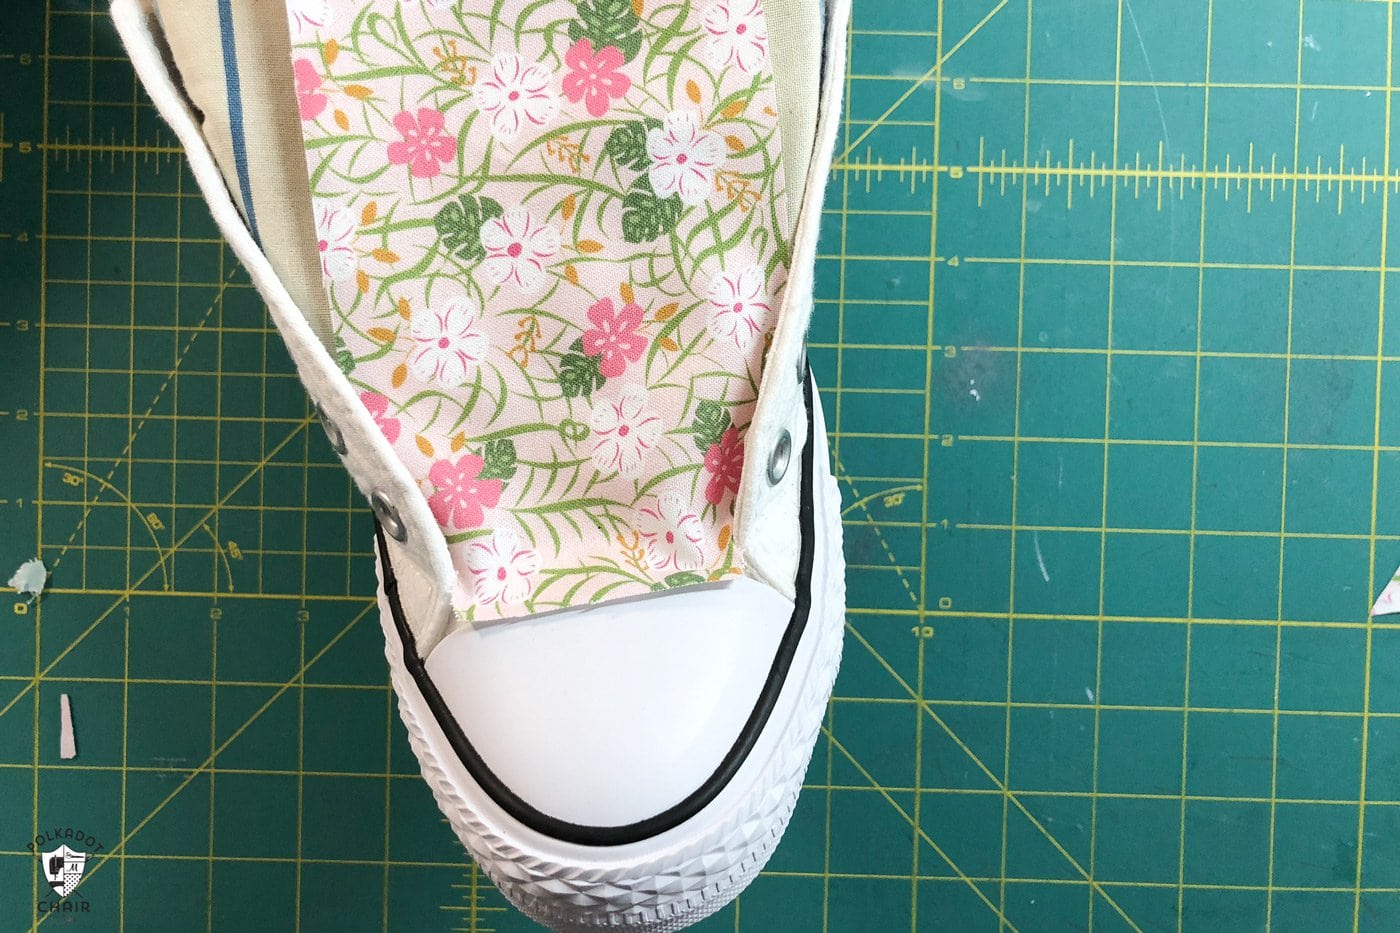 How to Customize Converse with Fabric - the Polka Dot Chair